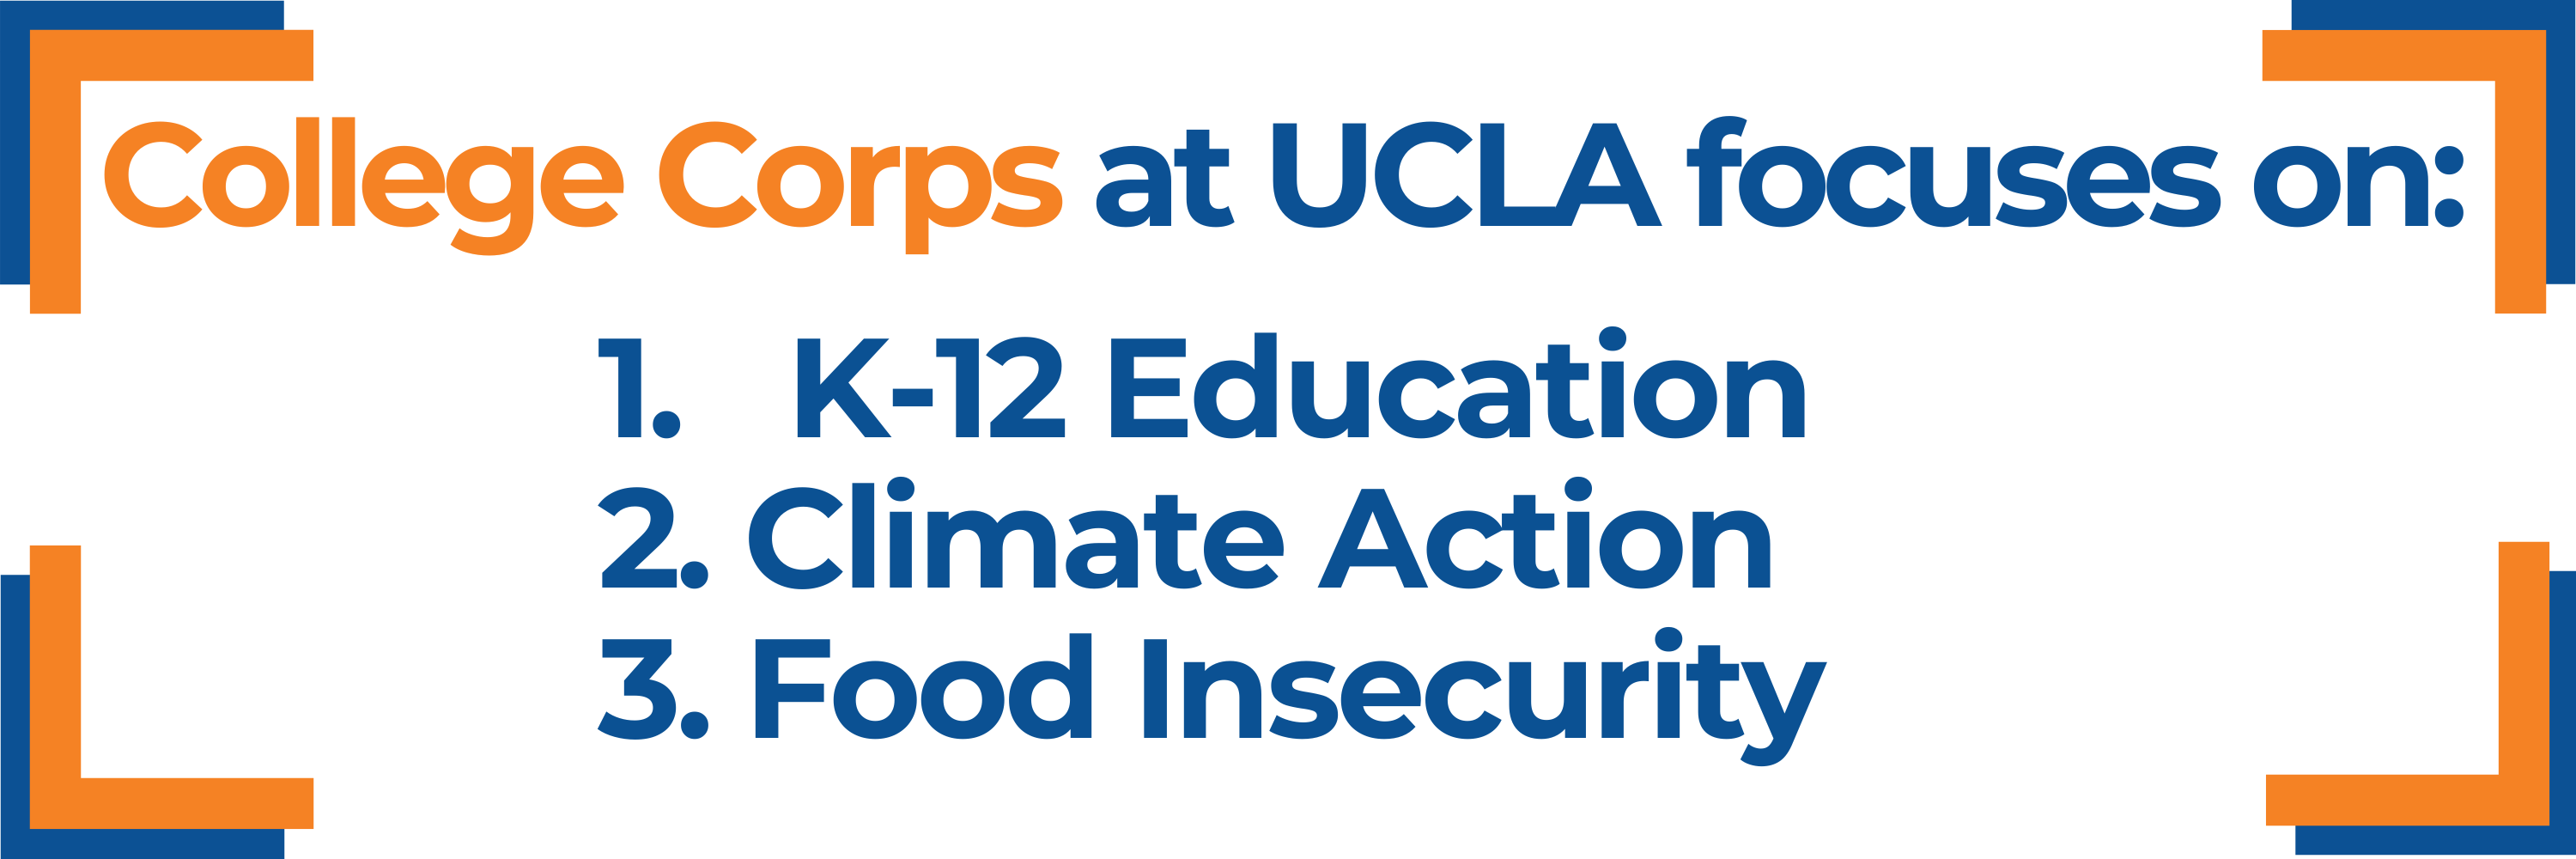 Blue and orange lettering reading, "College Corps at UCLA focuses on: 1. K-12 Education, 2. Climate Action, 3. Food Insecurity. All within blue and orange brackets.